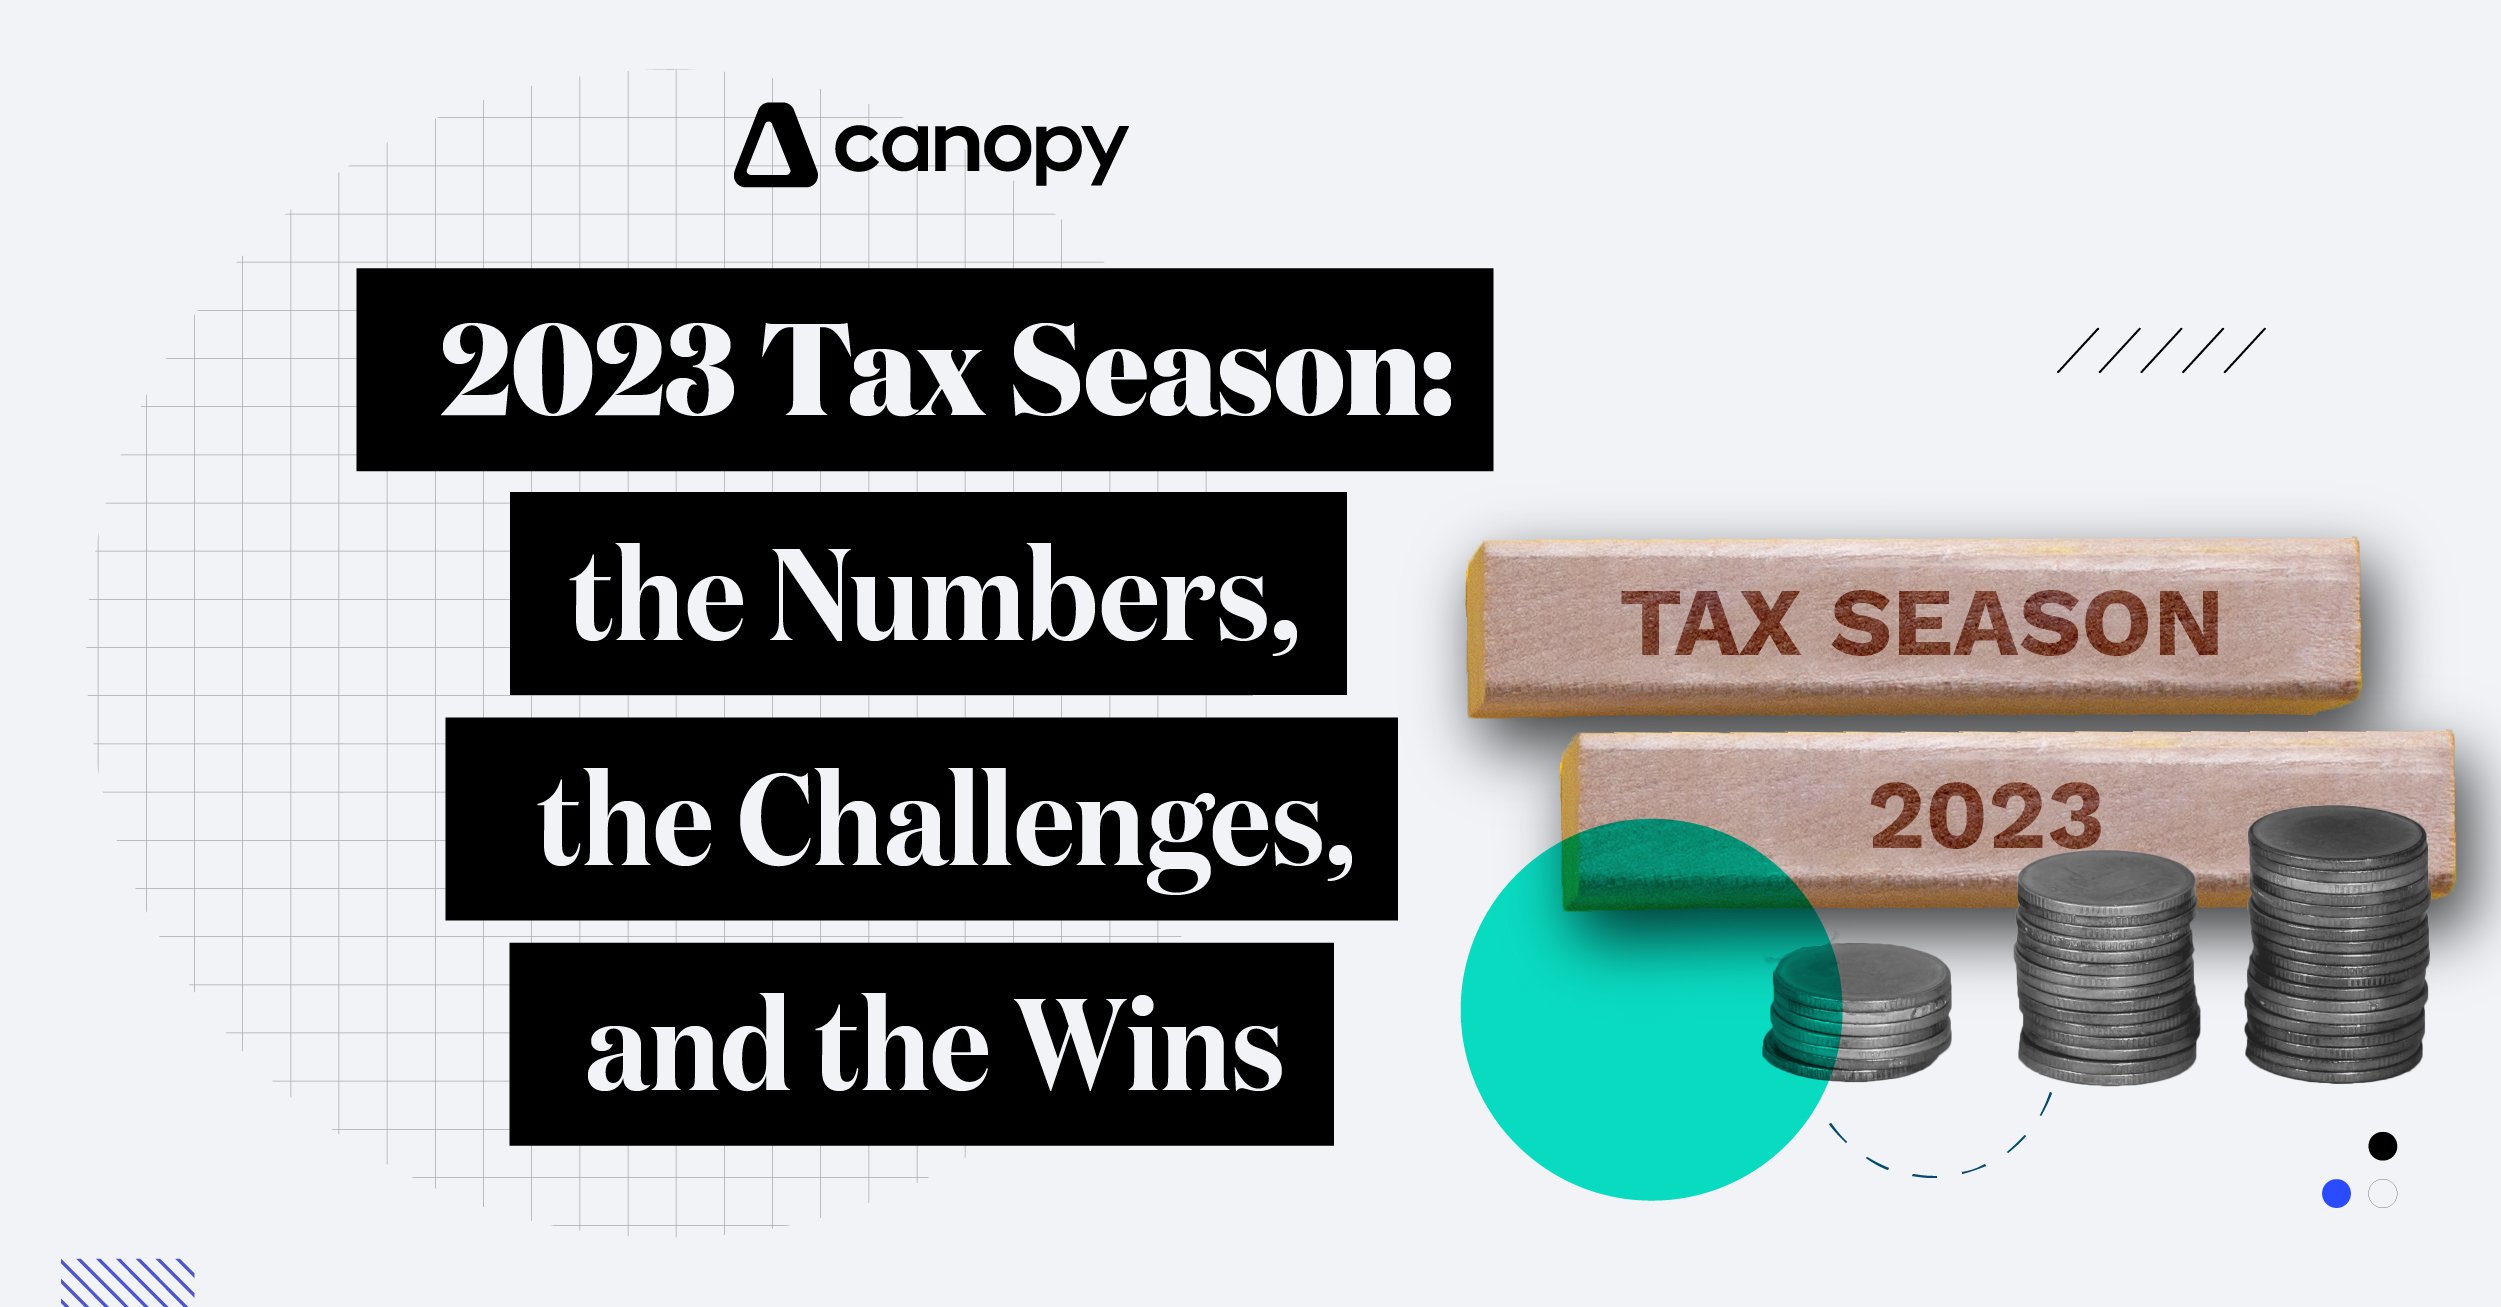 2023 Tax Season: the Numbers, the Challenges, and the Wins